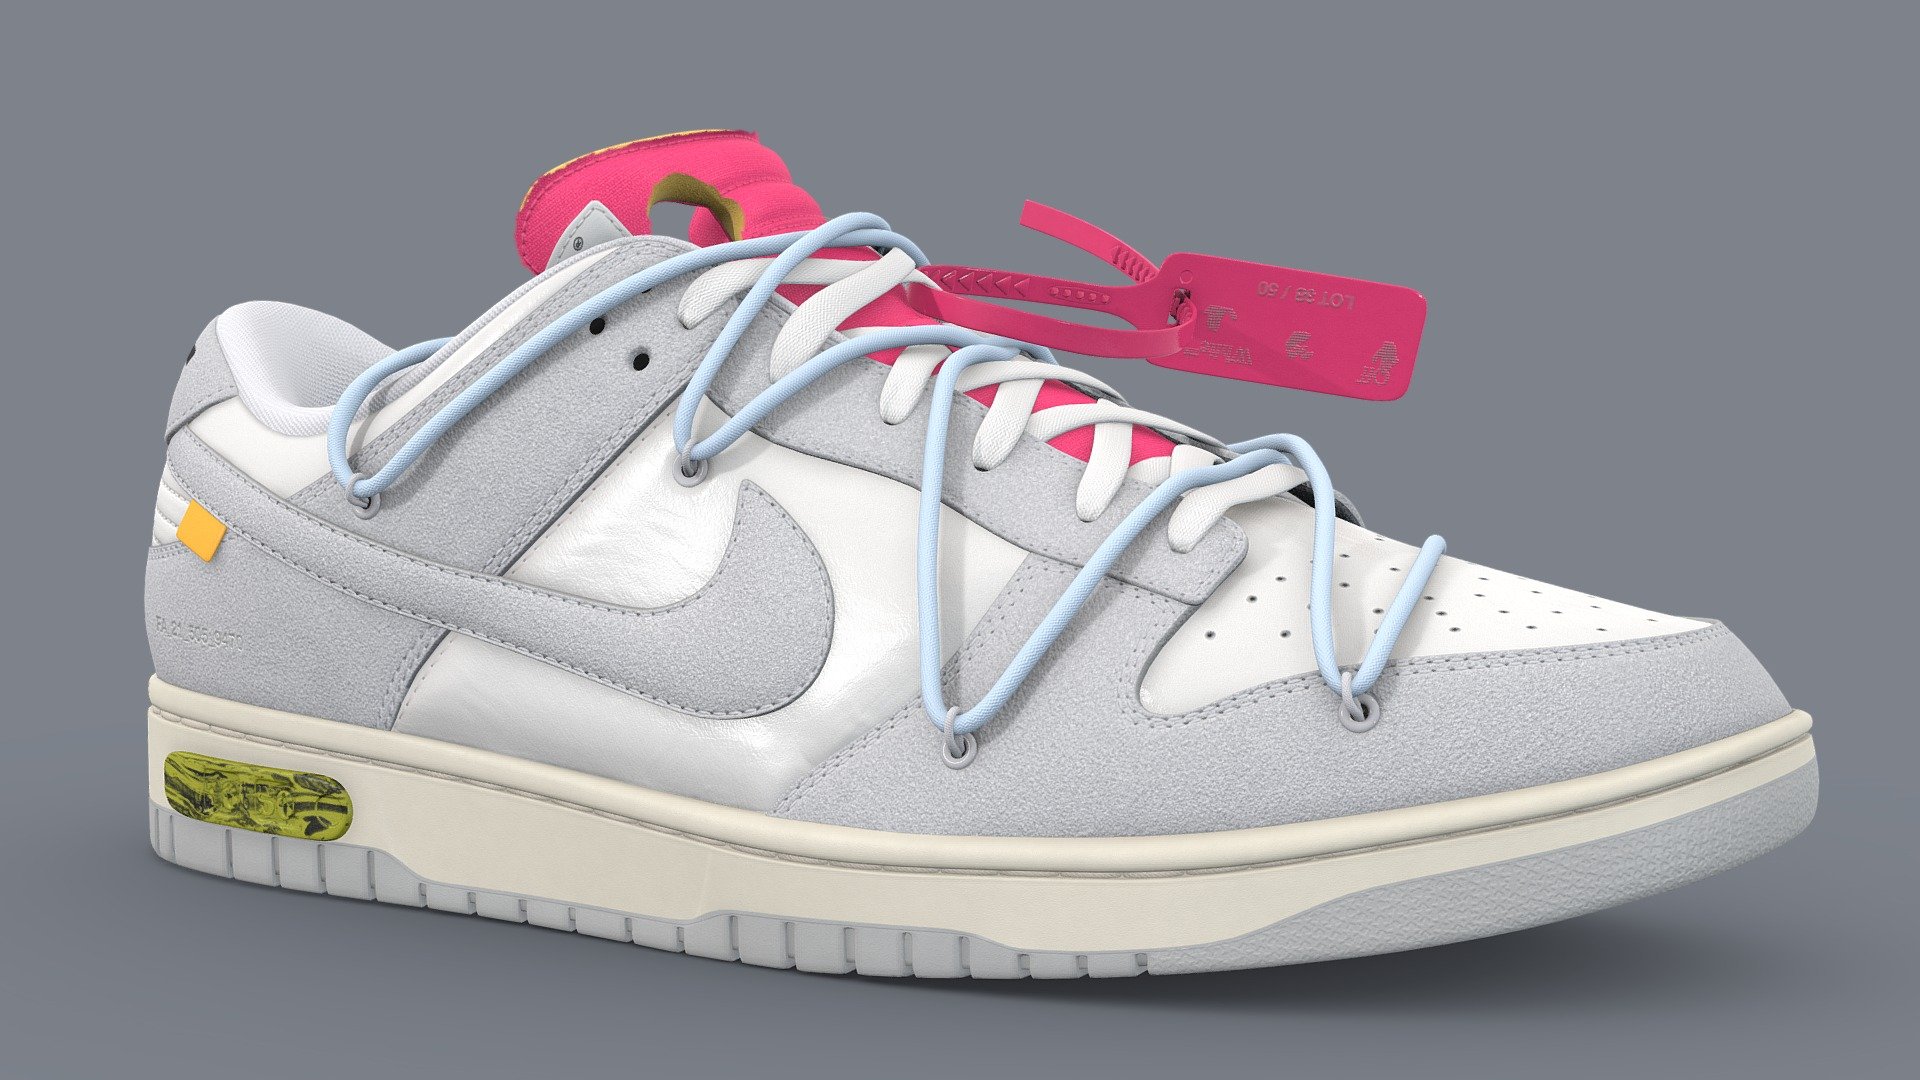 Off White collaboration with Nike on a Dunk Low, made in Blender, textured in Substance. Released in 2021. Each Lot has its own unique twist, this shoe boasts a vibrant pink tongue with leather and canvas panels.

Every detail was made in the recreation of this shoe, from the text on the medial side of the shoe to the subtlety of each material, nothing went overlooked. Stitches were sculpted by hand to achieve the highest quality, and the frayed edge on the tongue of the shoe was created such that there would be no gap between the canvas fabric and foam

What's included Firstly, two versions of this model. The base version with 4 texture sets, and a One Mesh version that uses only 1 texture set. Both models are identical, only how they are unwrapped is different. There are two texture sets, with 4 maps, namely: Base Color, Metallic, Normal, and Roughness. I have included several other versions, such as High and Low Poly shoes All textures are 4096x4096. Meaning the One Mesh version has 4 2048x2048 textures 3d model